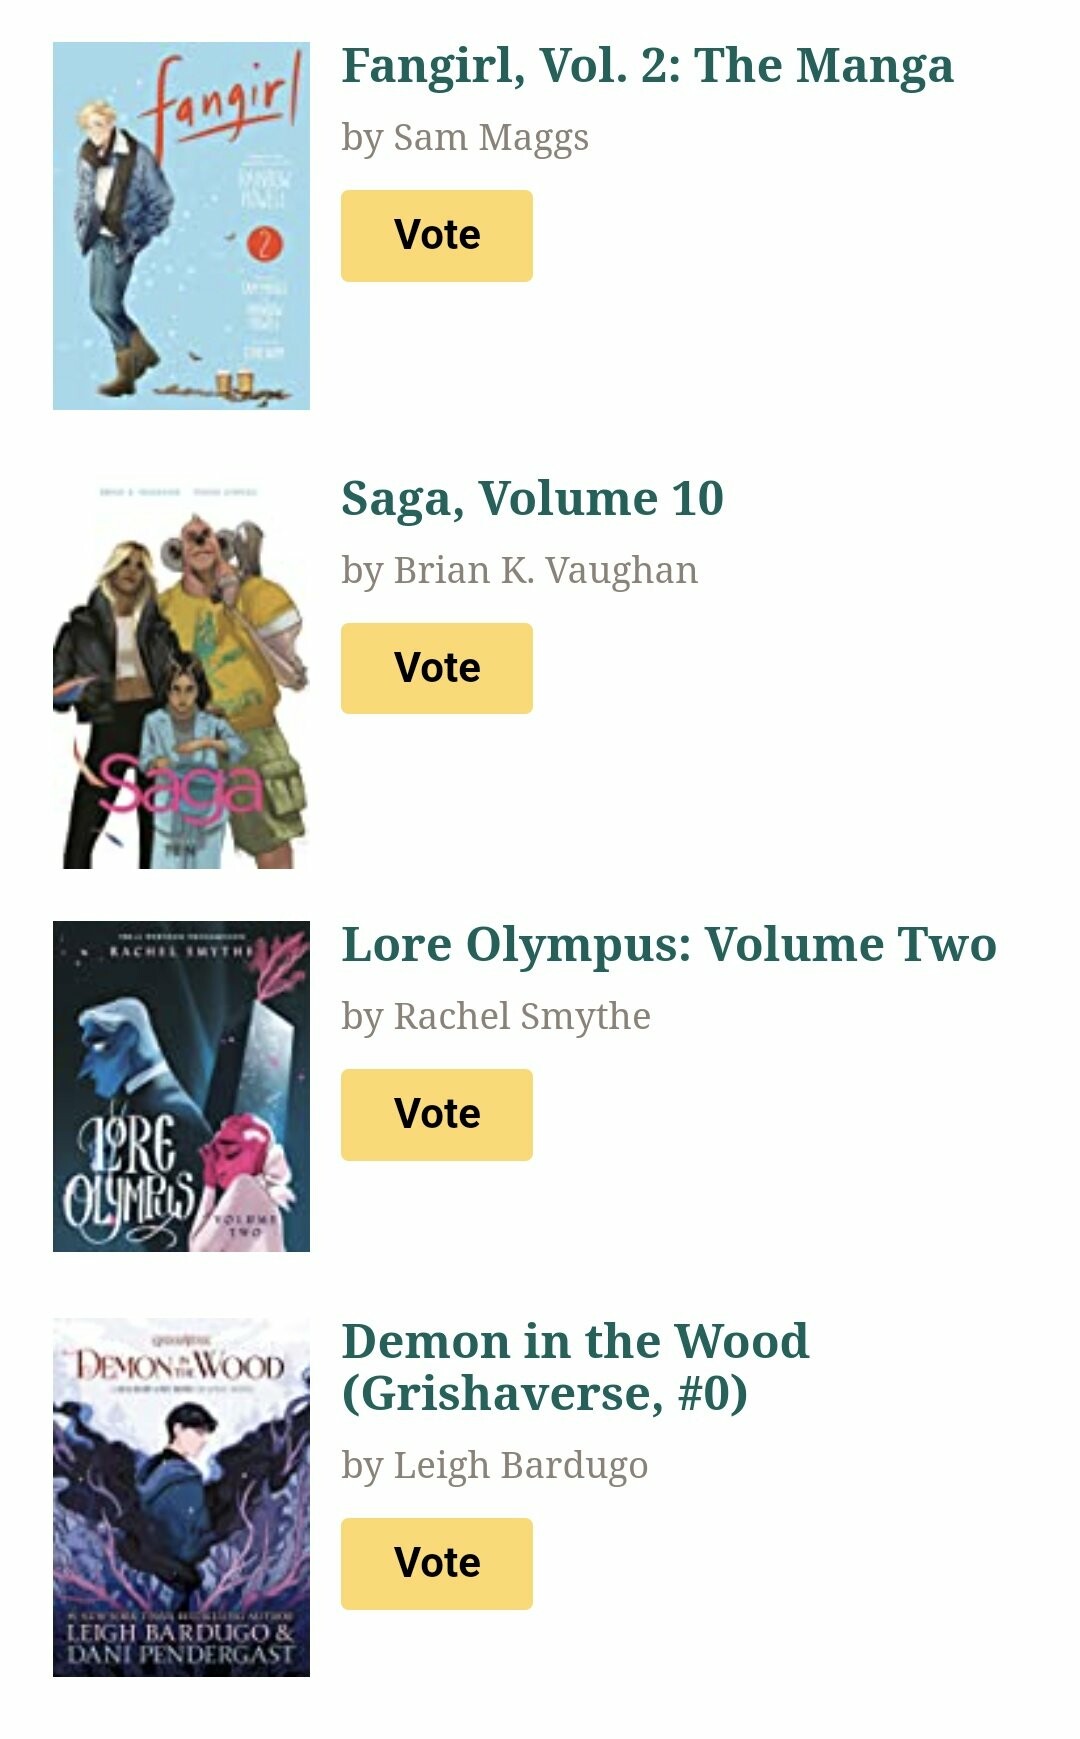 Screenshot of Goodreads voting form in which Fangirl Vol 2, Saga Vol 10, and Demon in the Wood are credited to only the writer but not the artist. 